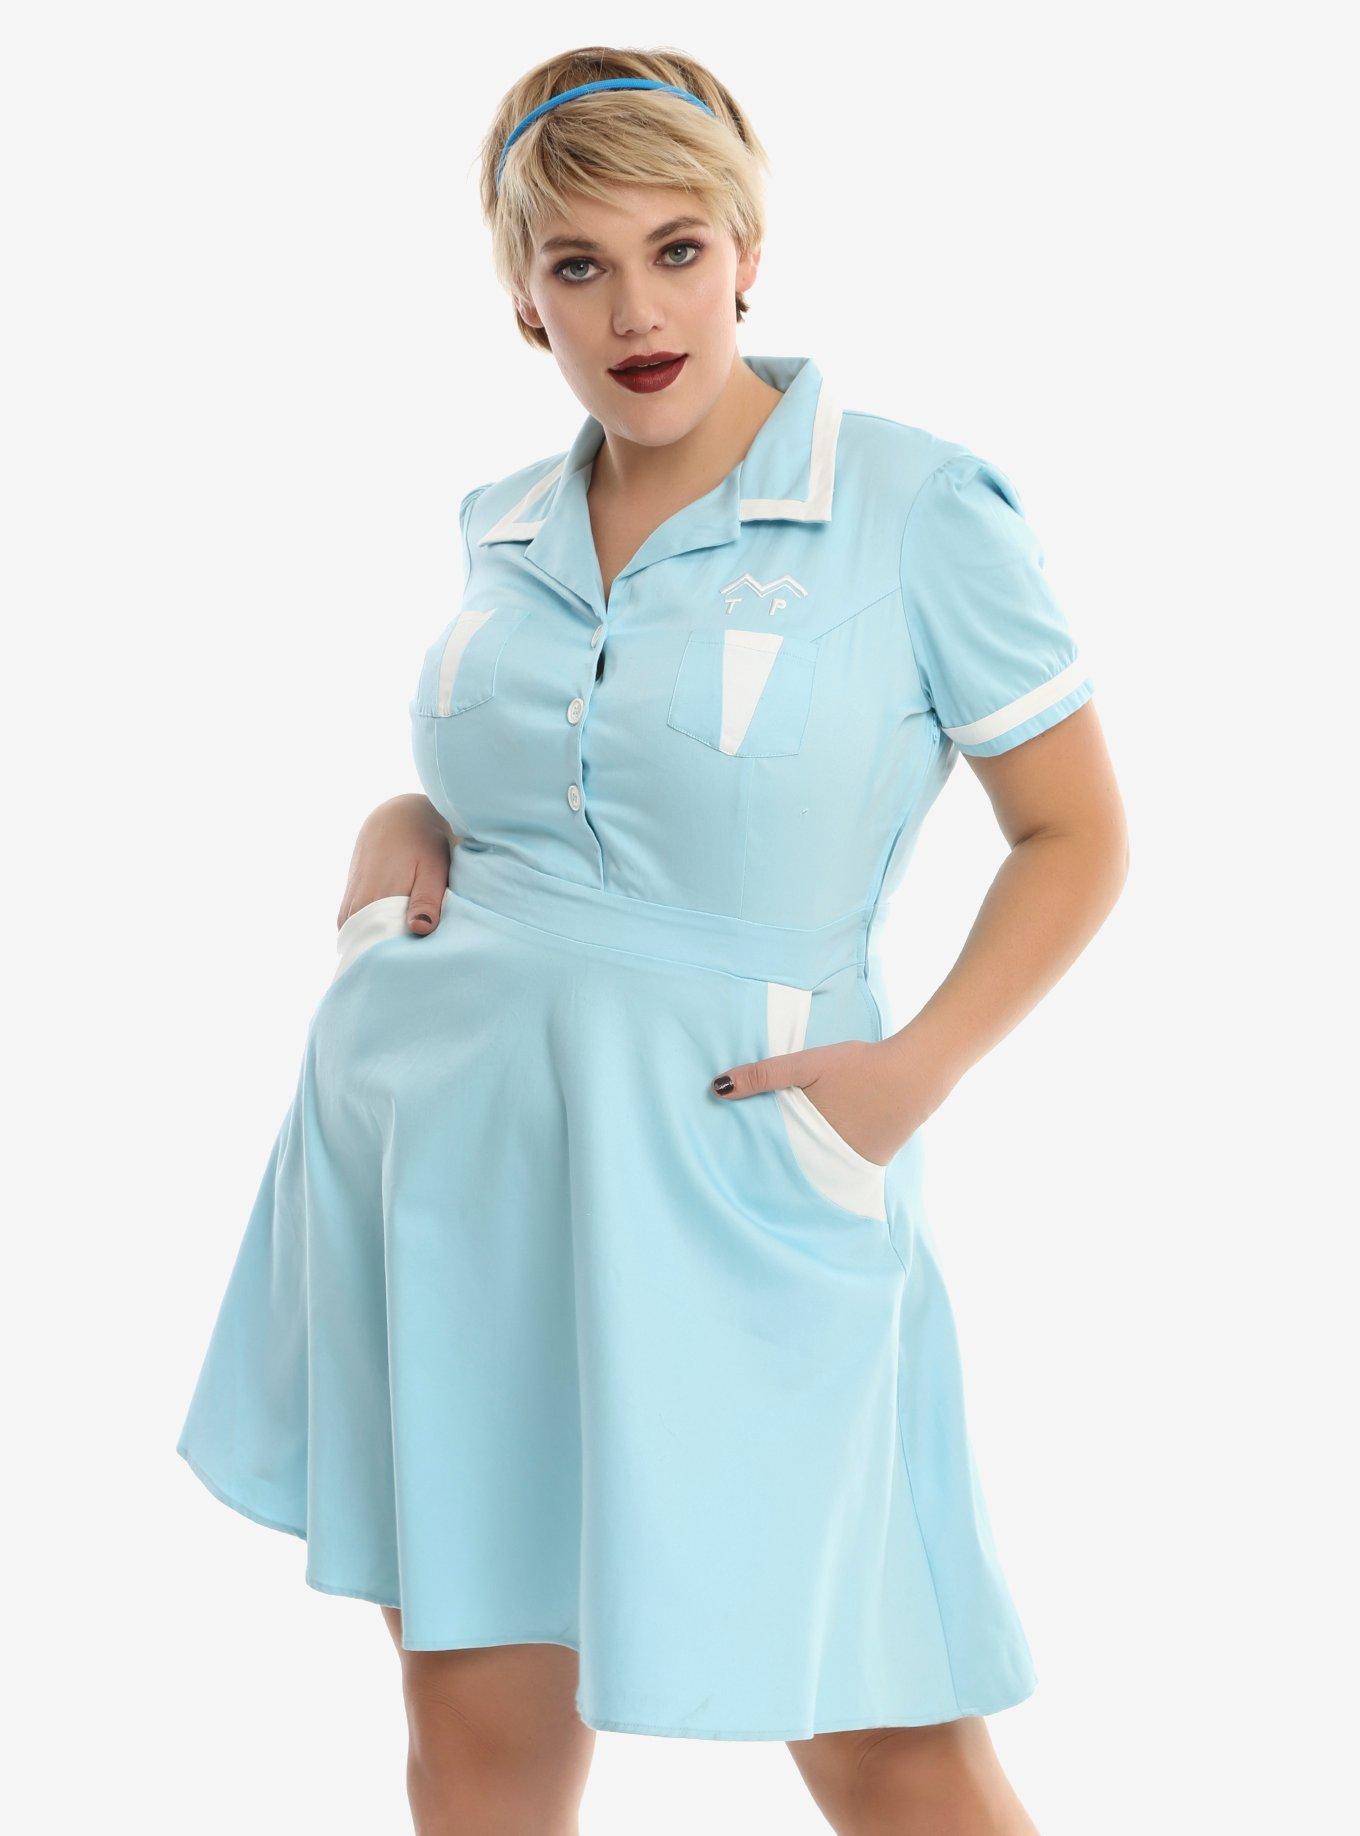 Twin Peaks Double R Diner Waitress Cosplay Dress Plus Size, WHITE, hi-res